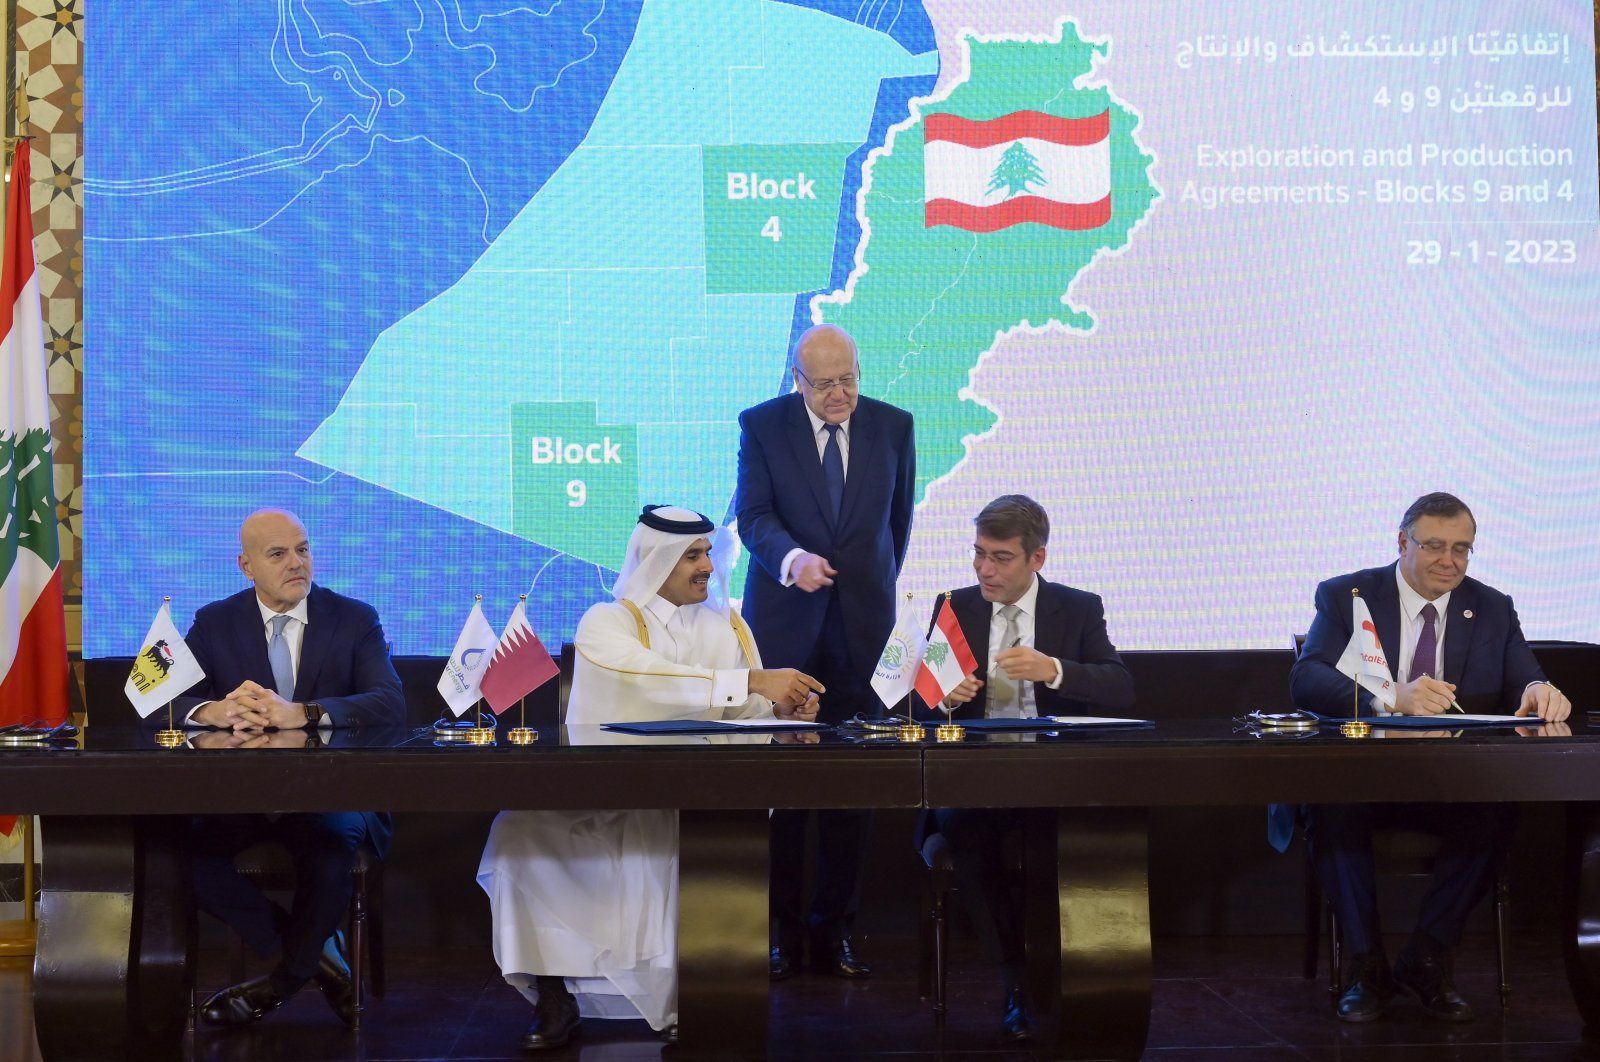 From left, Claudio Descalzi, the CEO of Italy&#039;s state-run energy company, ENI, Qatar&#039;s Minister of State for Energy Affairs Saad Sherida al-Kaabi, Lebanese caretaker Prime Minister Najib Mikati, Lebanese caretaker Energy Minister Walid Fayad and TotalEnergies CEO Patrick Pouyanne sign an agreement in Beirut, Lebanon, Jan. 29, 2023. (EPA Photo)